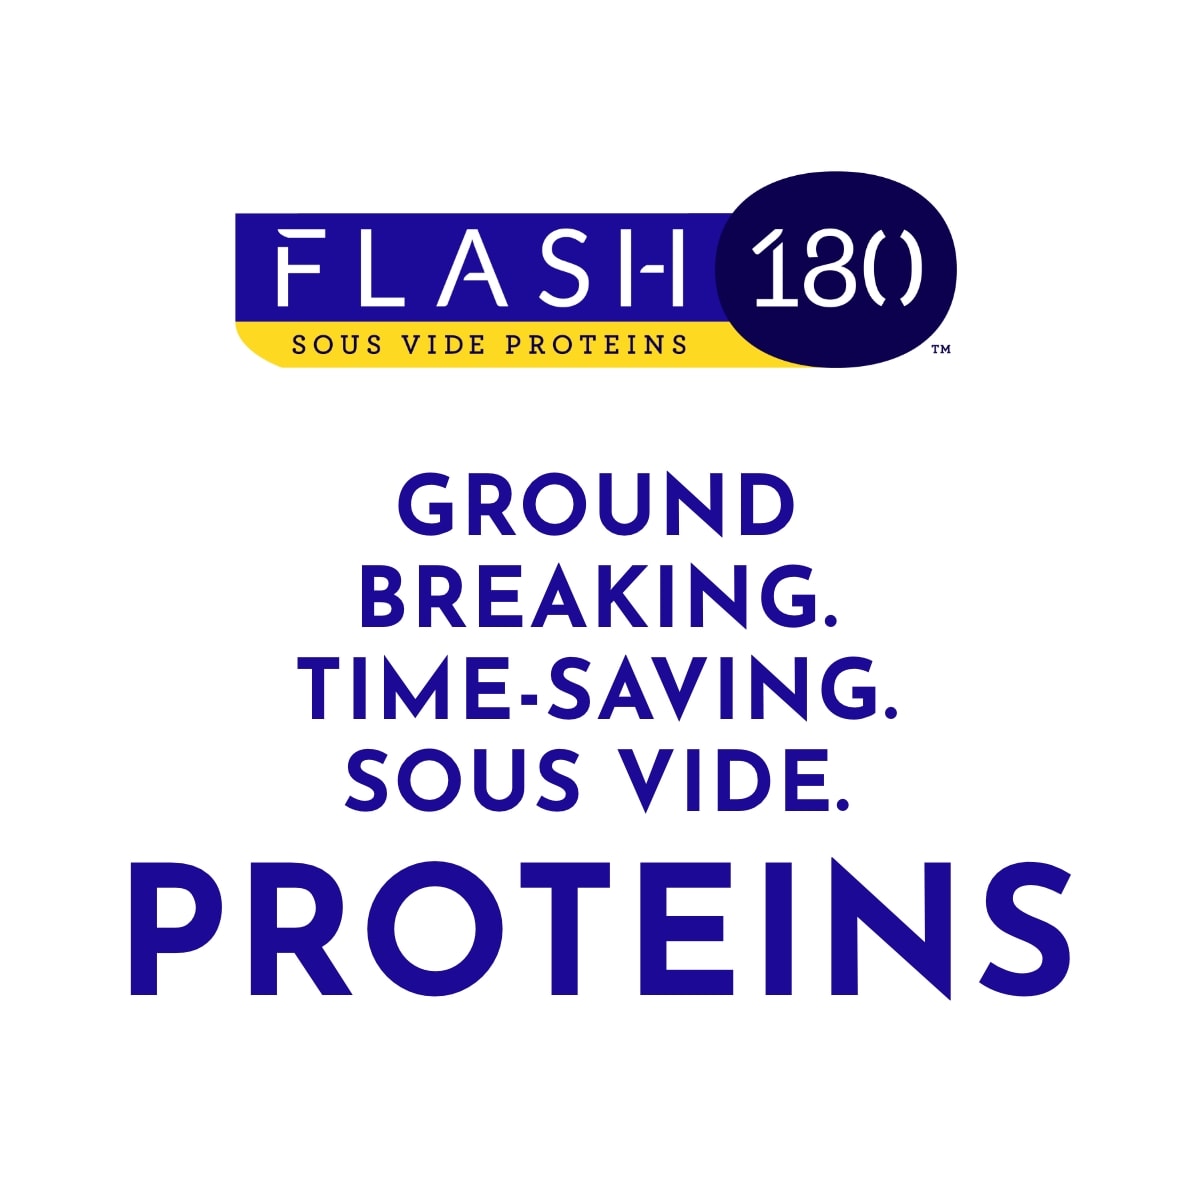 Flash 180 Speed Proteins - Ground breaking. Time-saving. Sous vide.